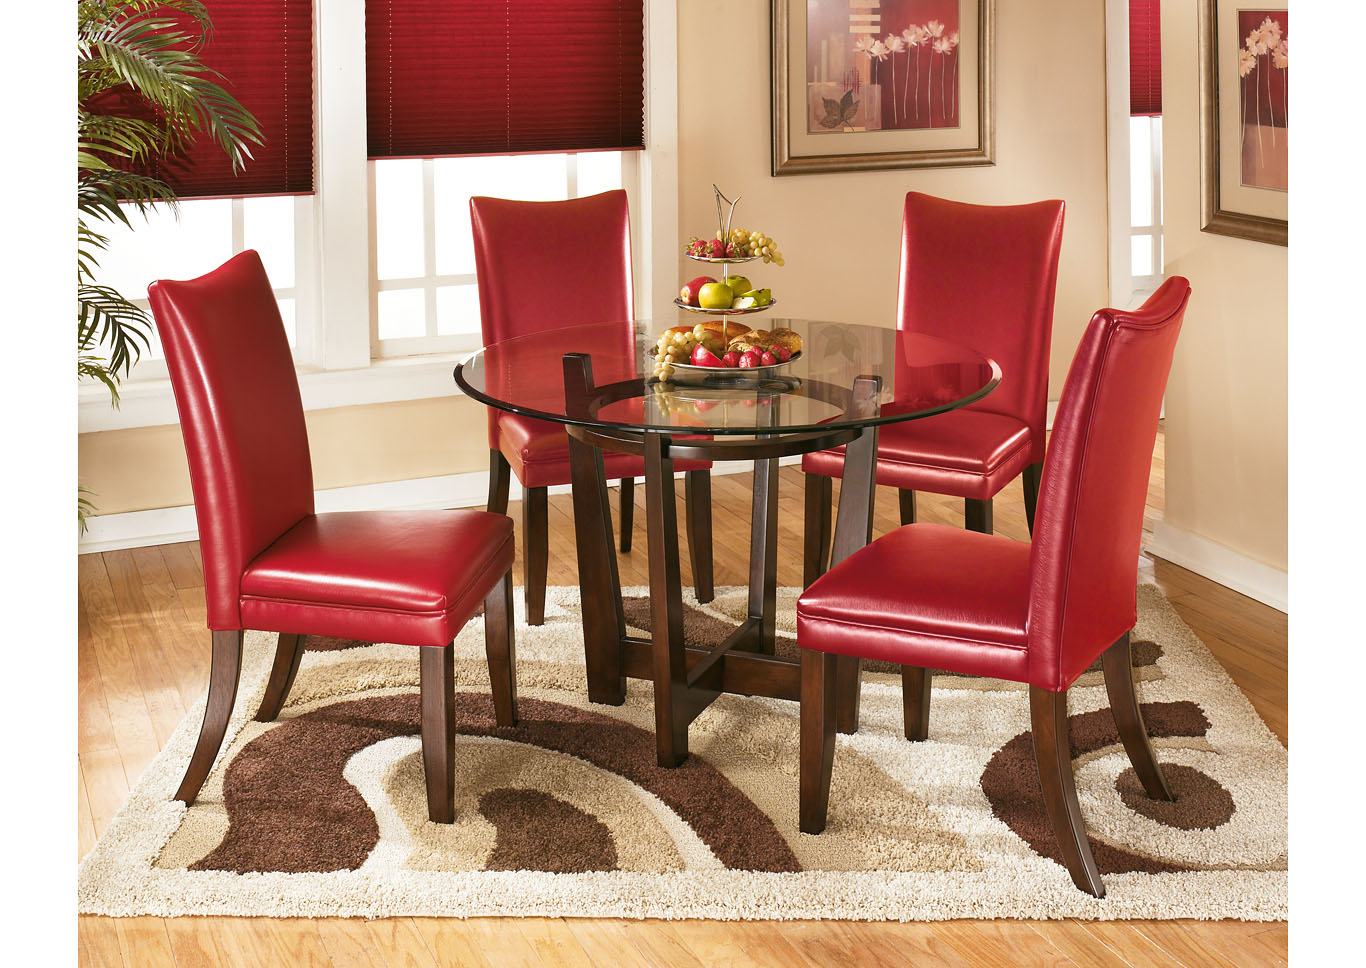 Majek Furniture Charell Round Dining Table W 4 Red Side Chairs within proportions 1366 X 968